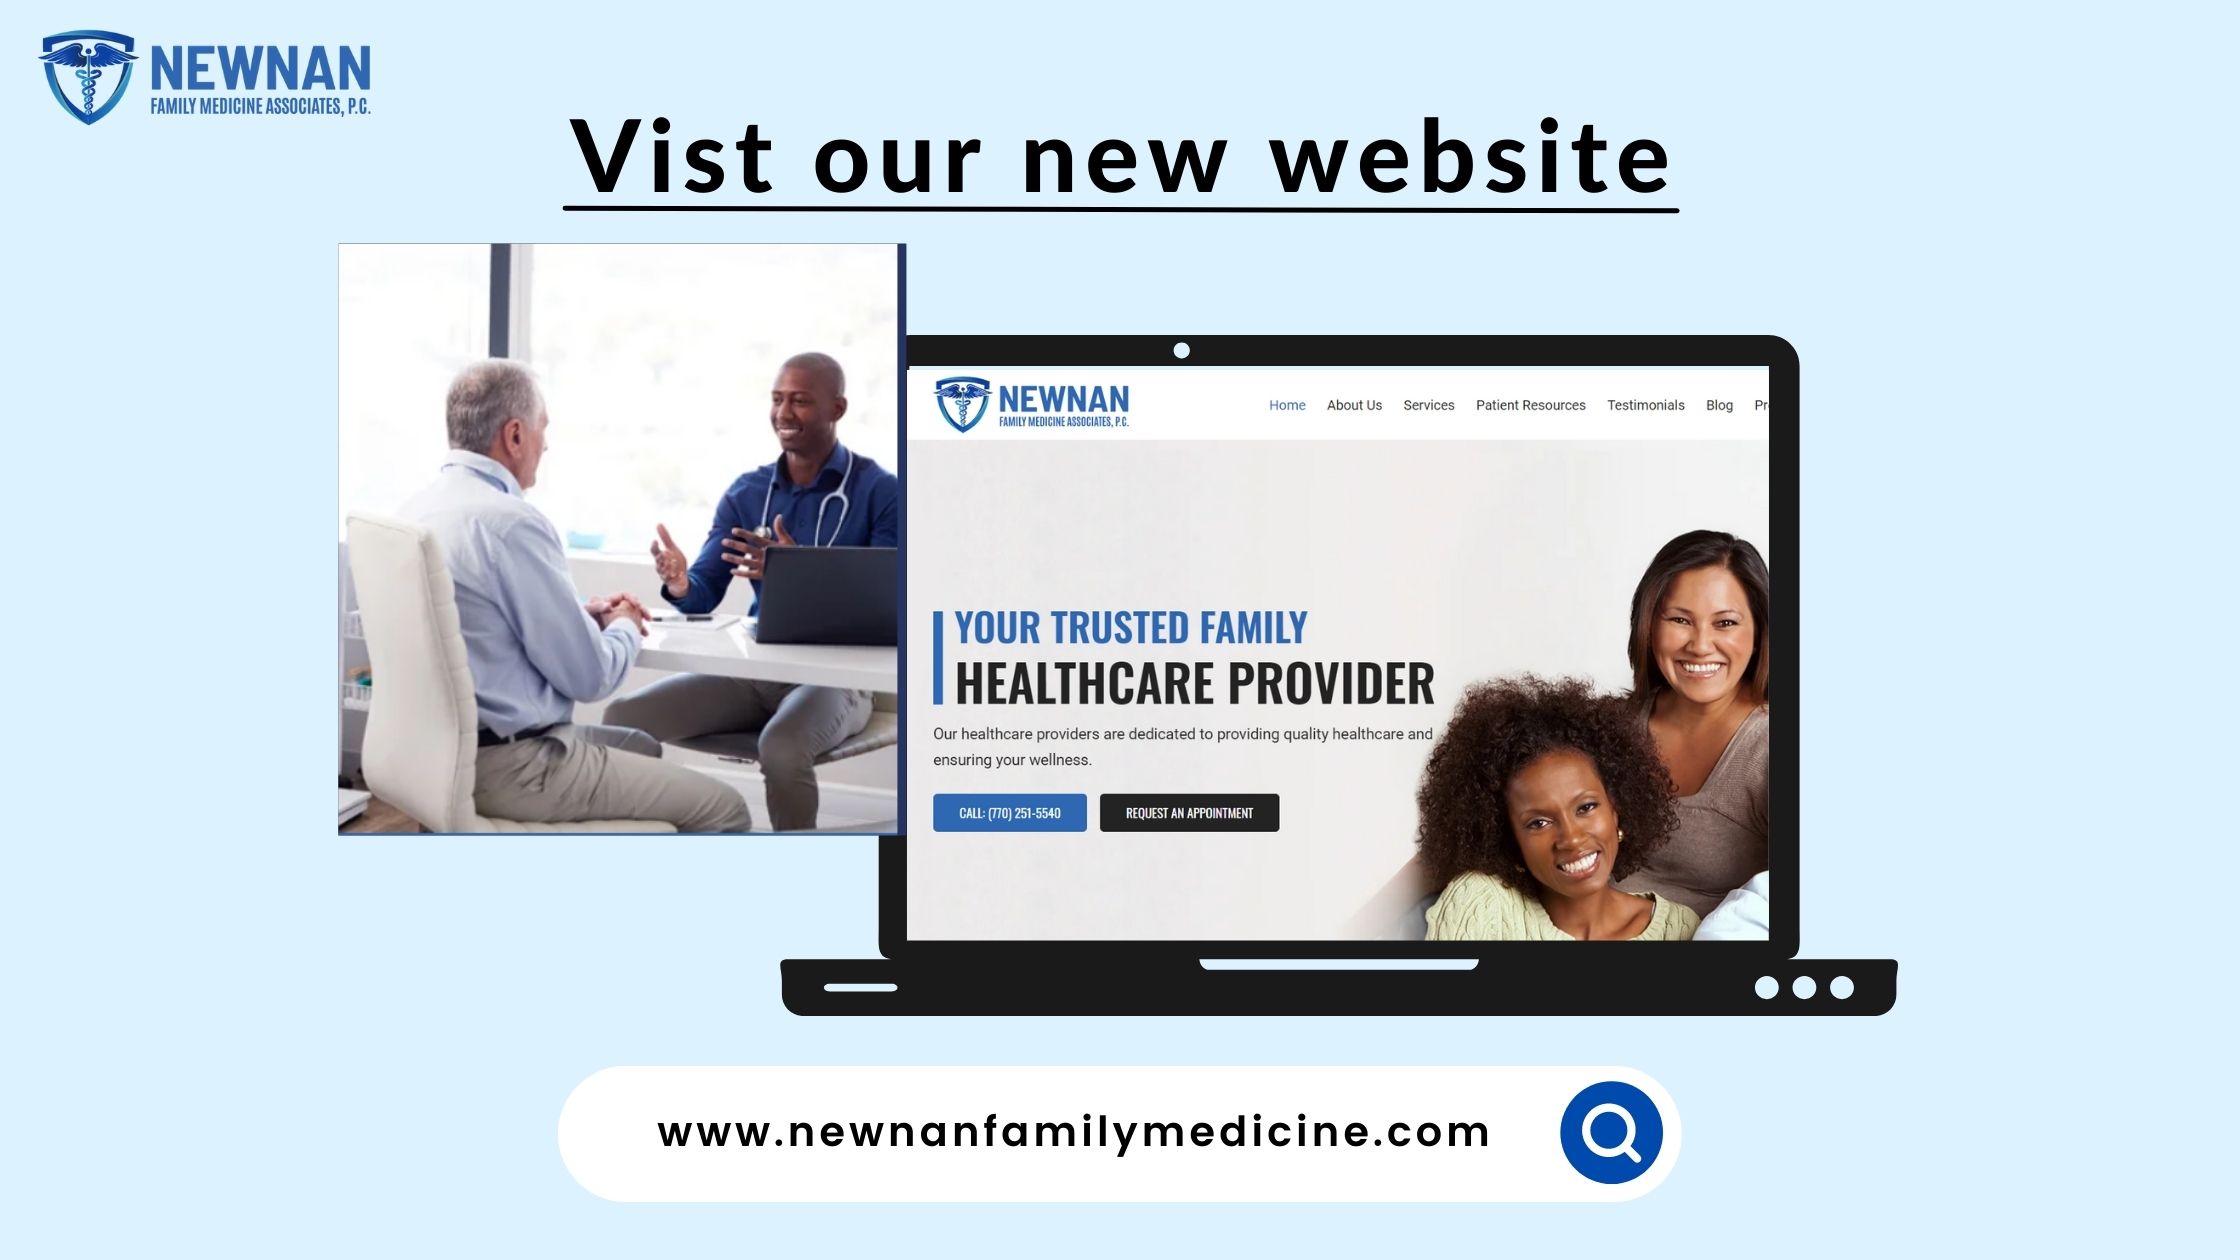 Have You Visited Our New Website?